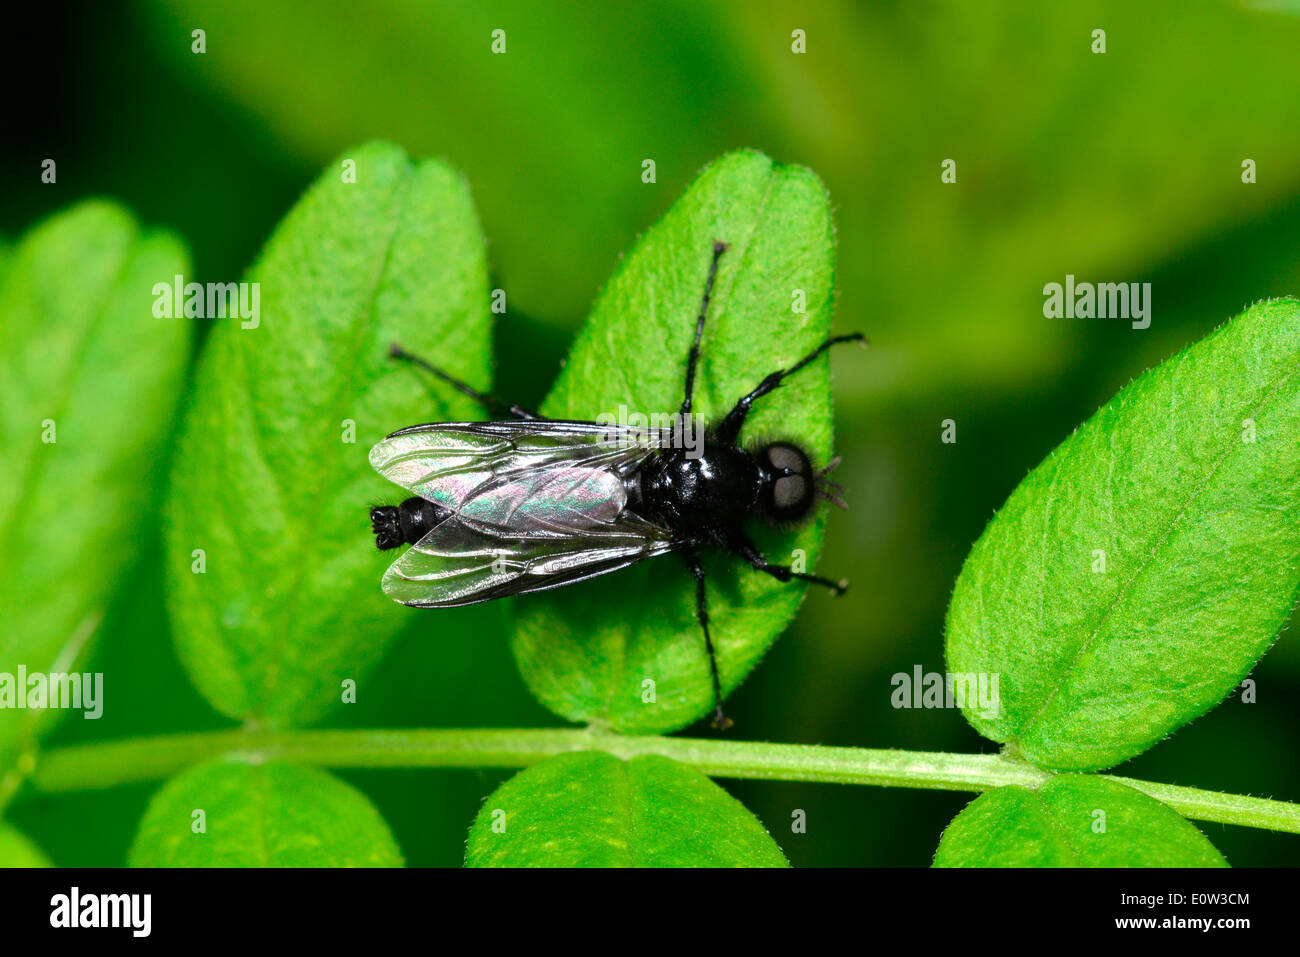 March Fly (Bibio marci), male on a leaf. Germany Stock Photo